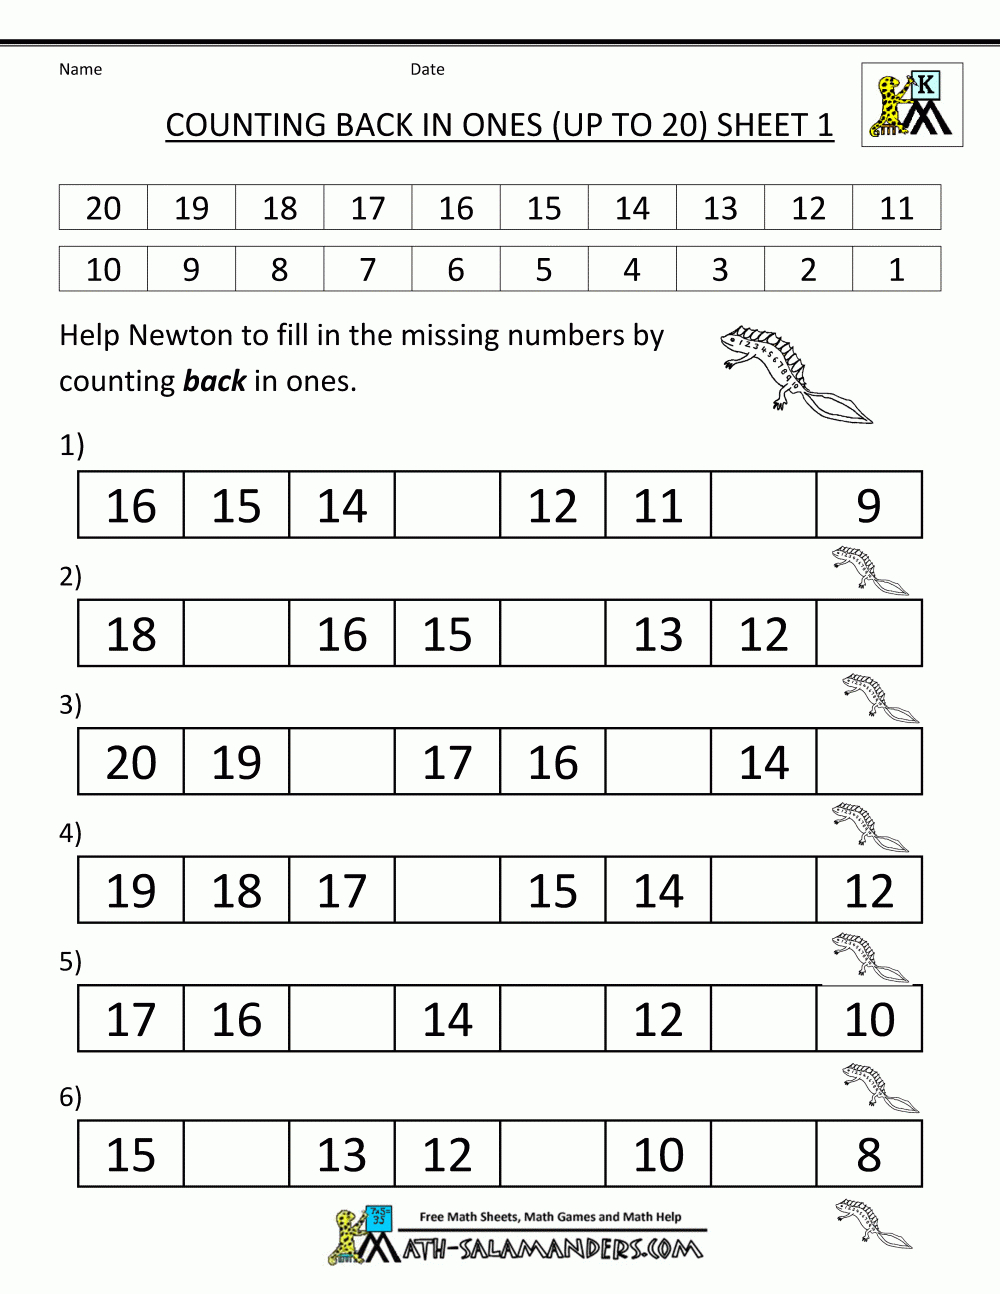 kindergarten-counting-worksheets-sequencing-to-25-free-printable-counting-worksheets-1-20